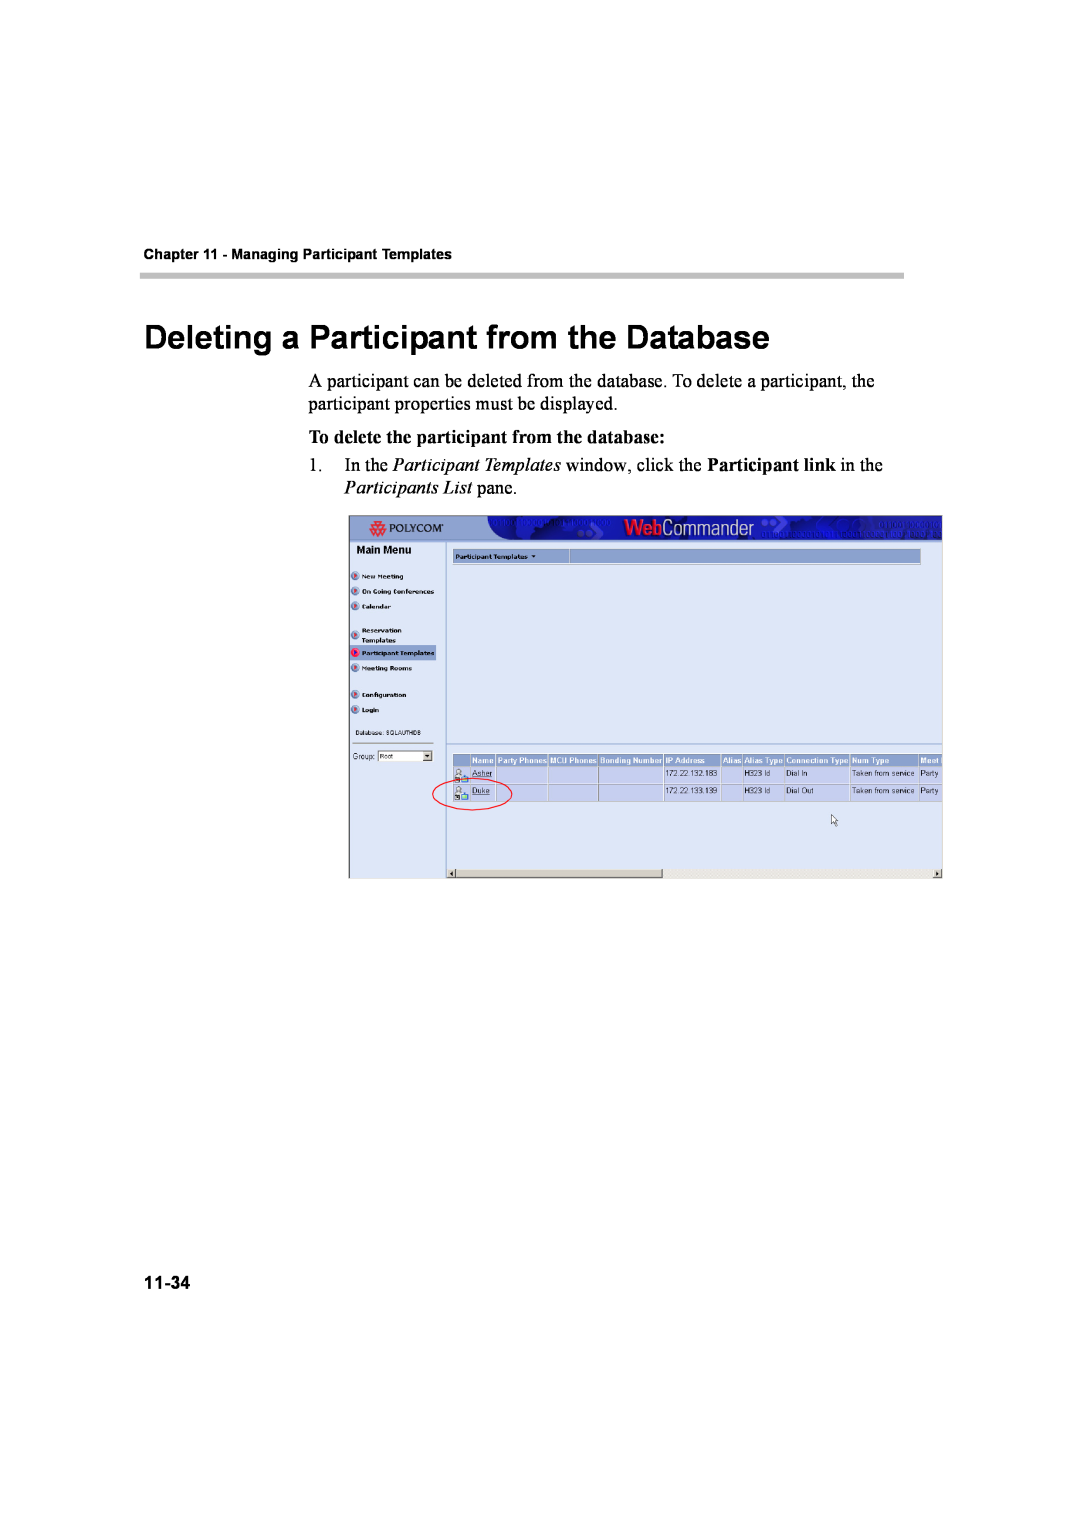 Polycom 8 manual Deleting a Participant from the Database, To delete the participant from the database 